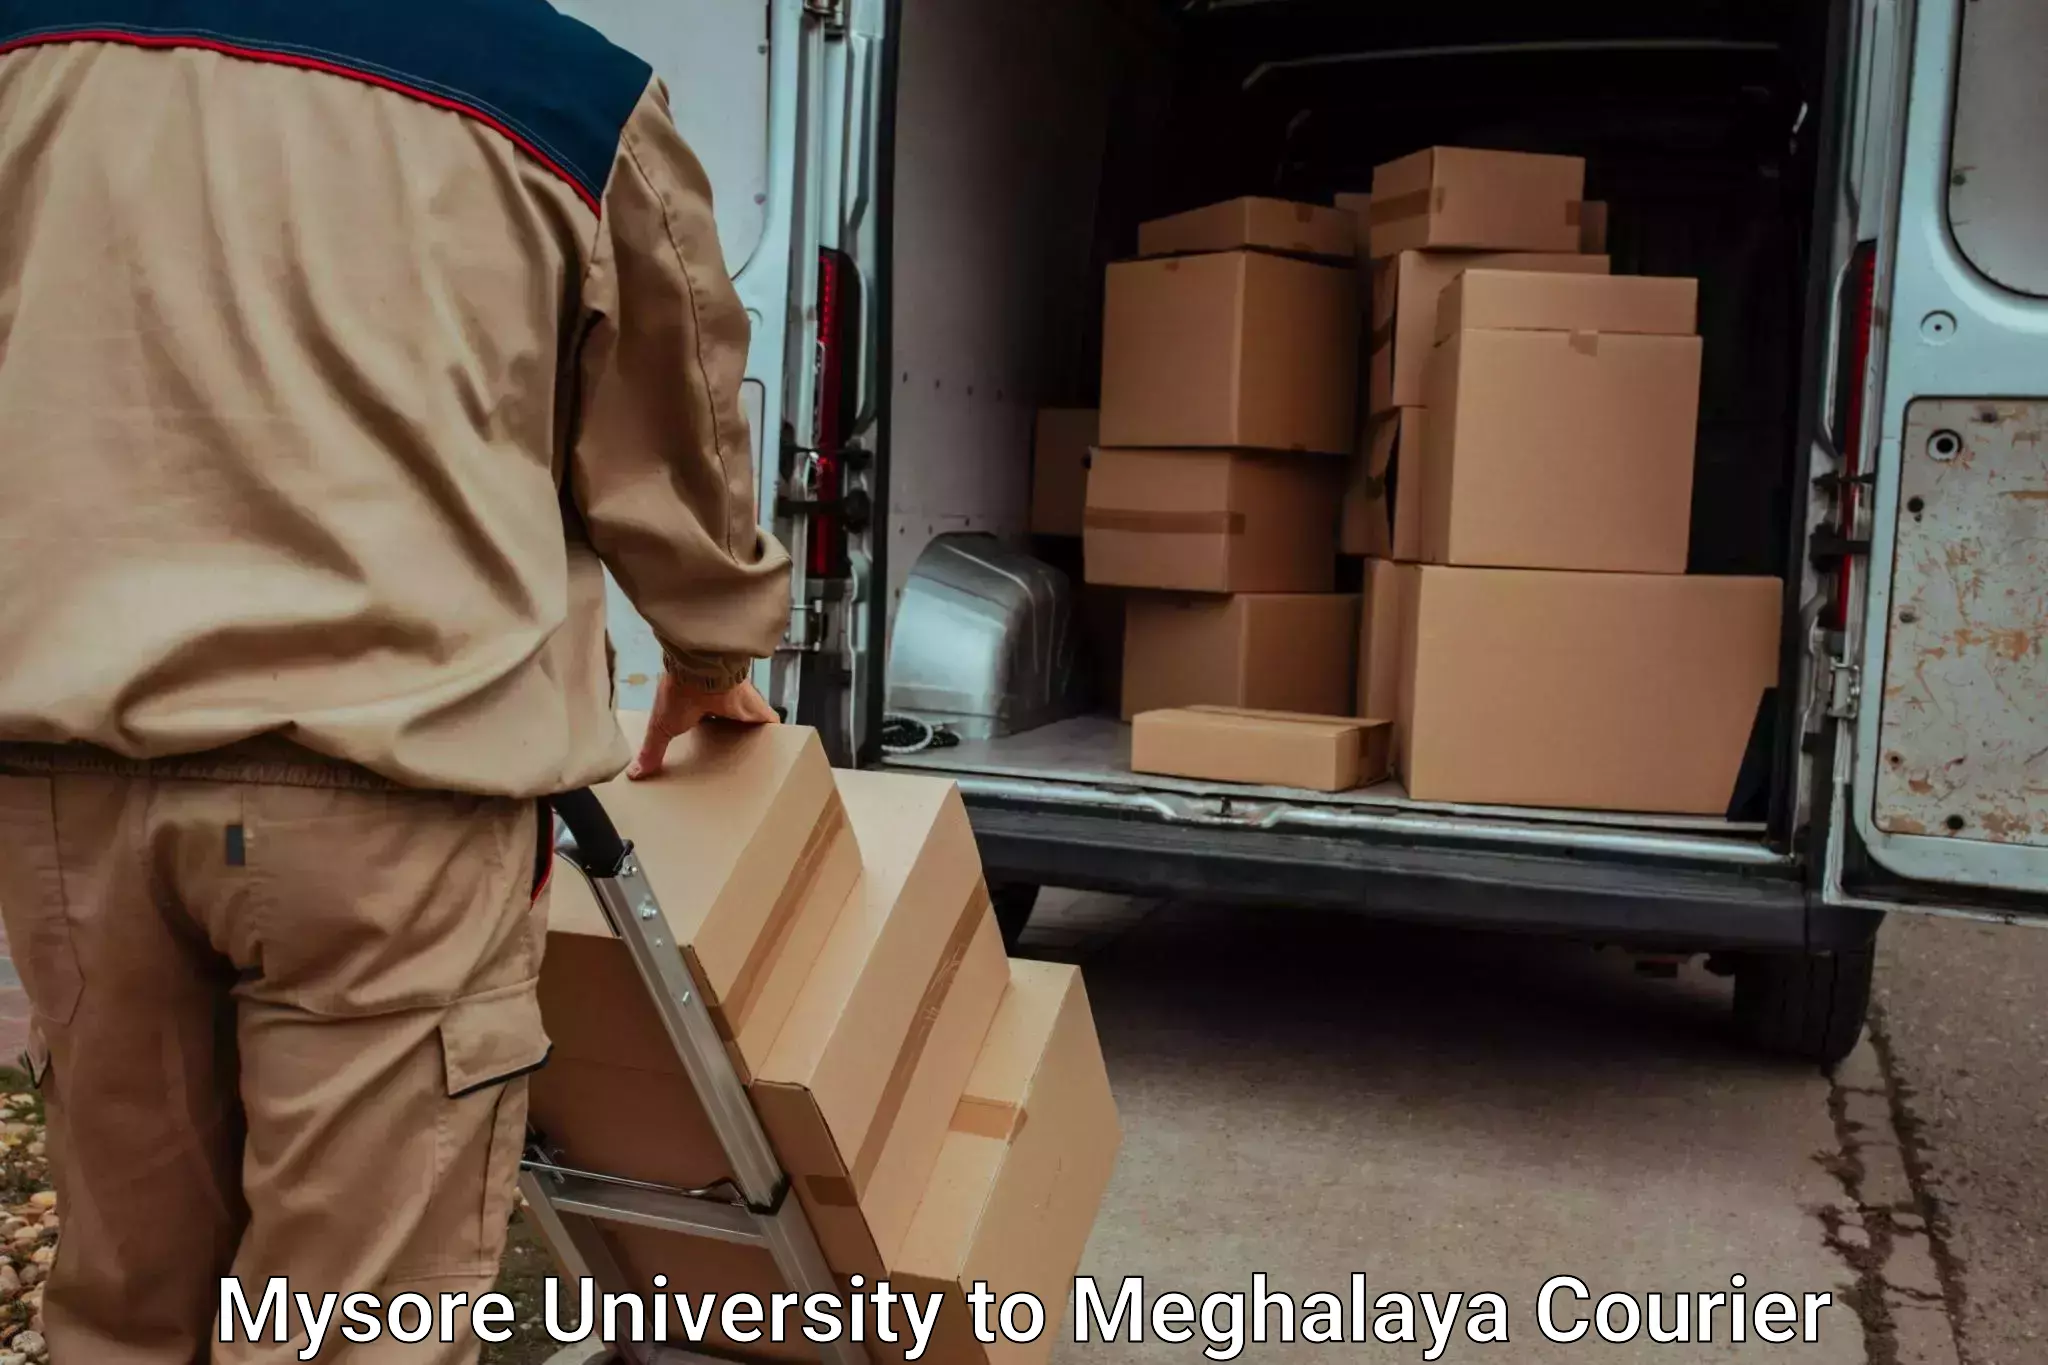 Weekend baggage shipping Mysore University to Shillong